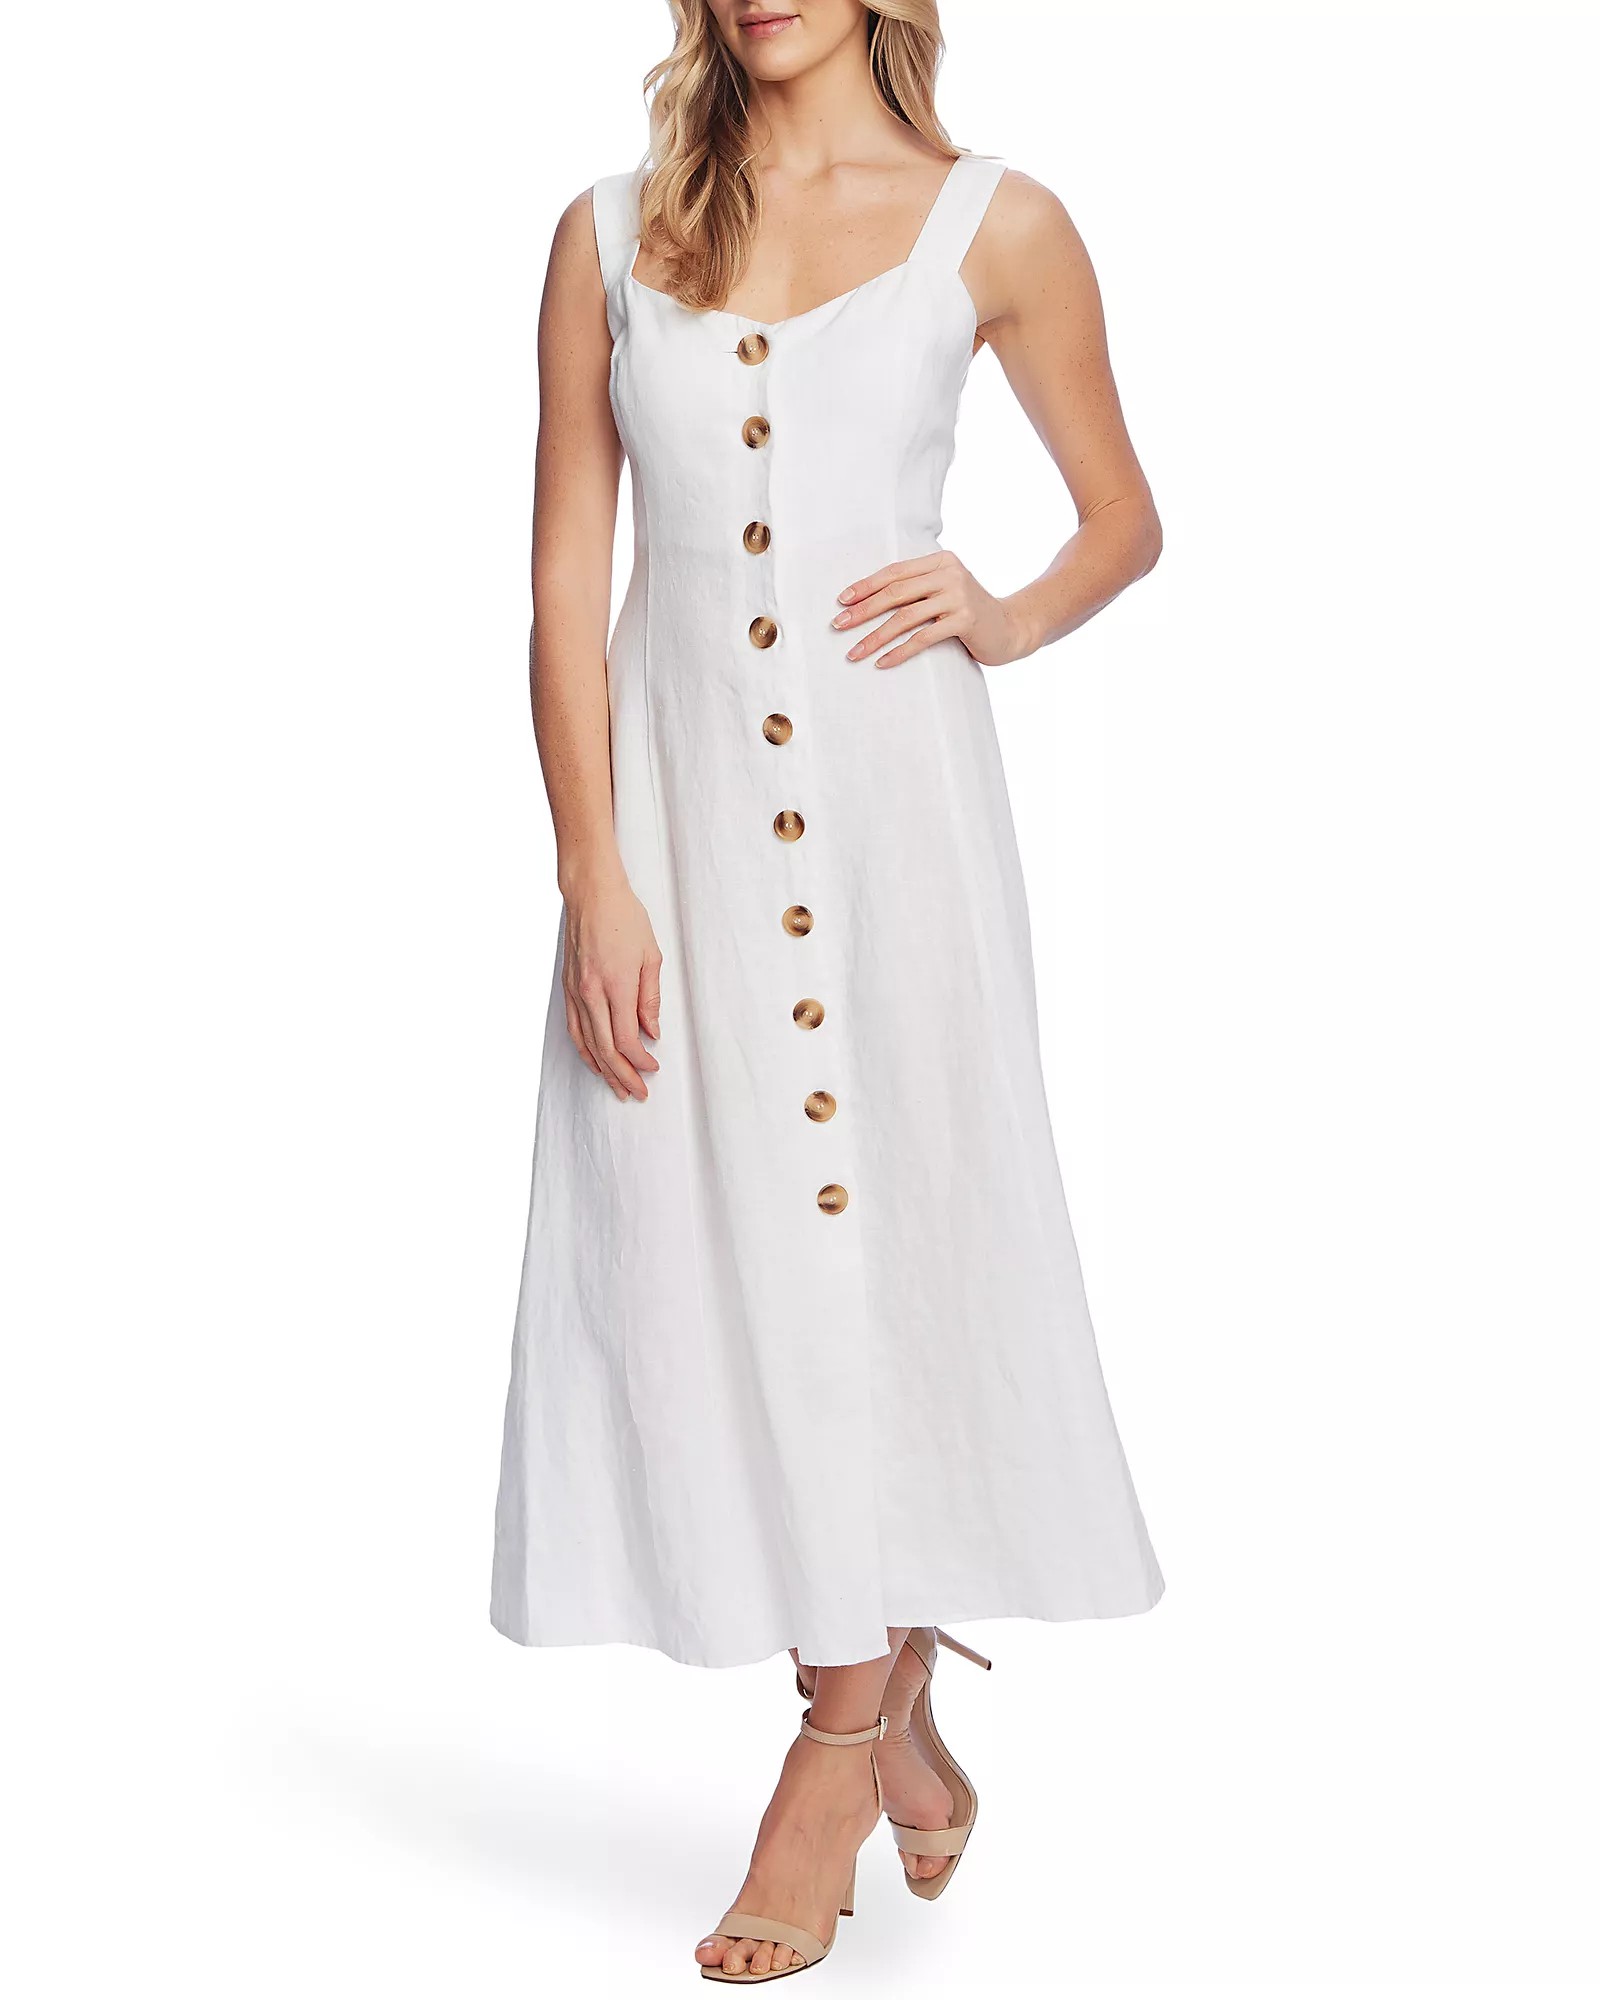 Women's Vince Camuto Dresses, Clothing